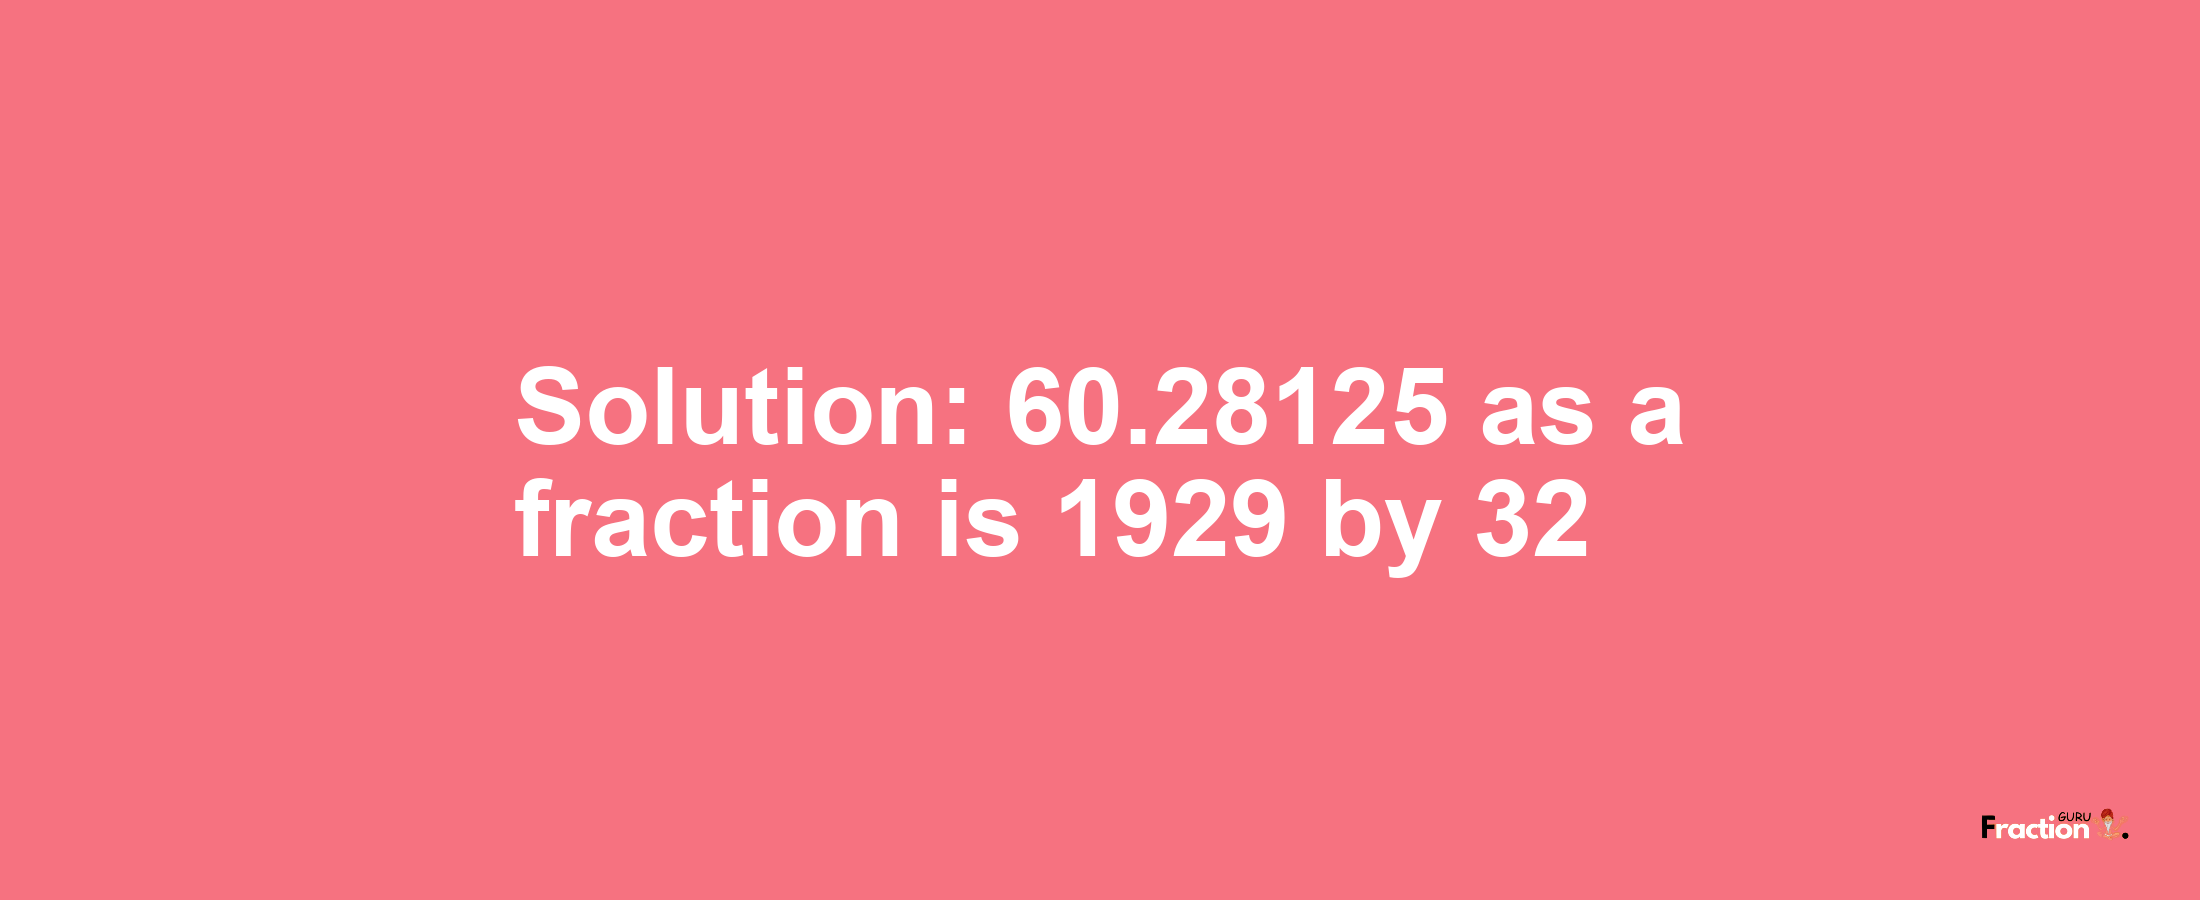 Solution:60.28125 as a fraction is 1929/32